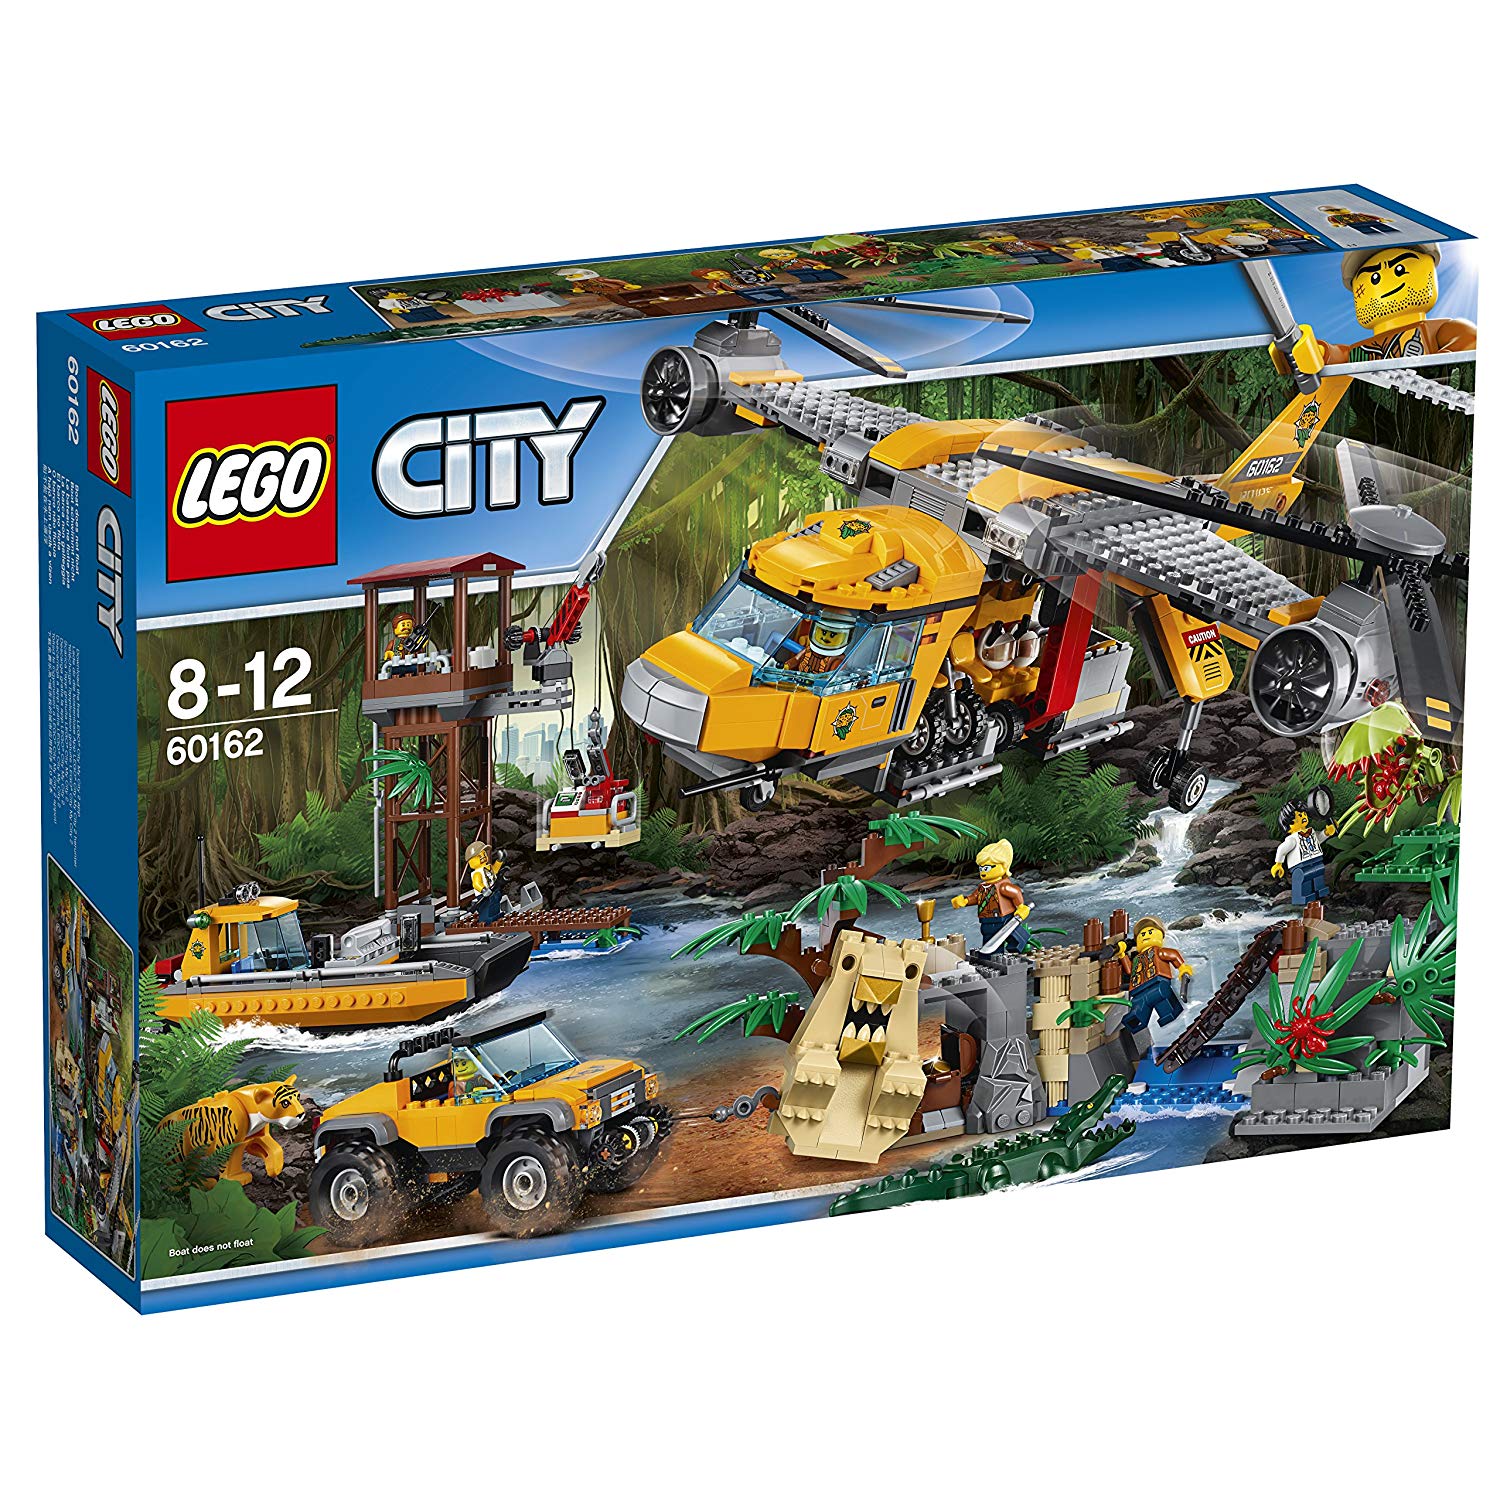 Lego City Jungle 60162 Jungle Power Helicopter